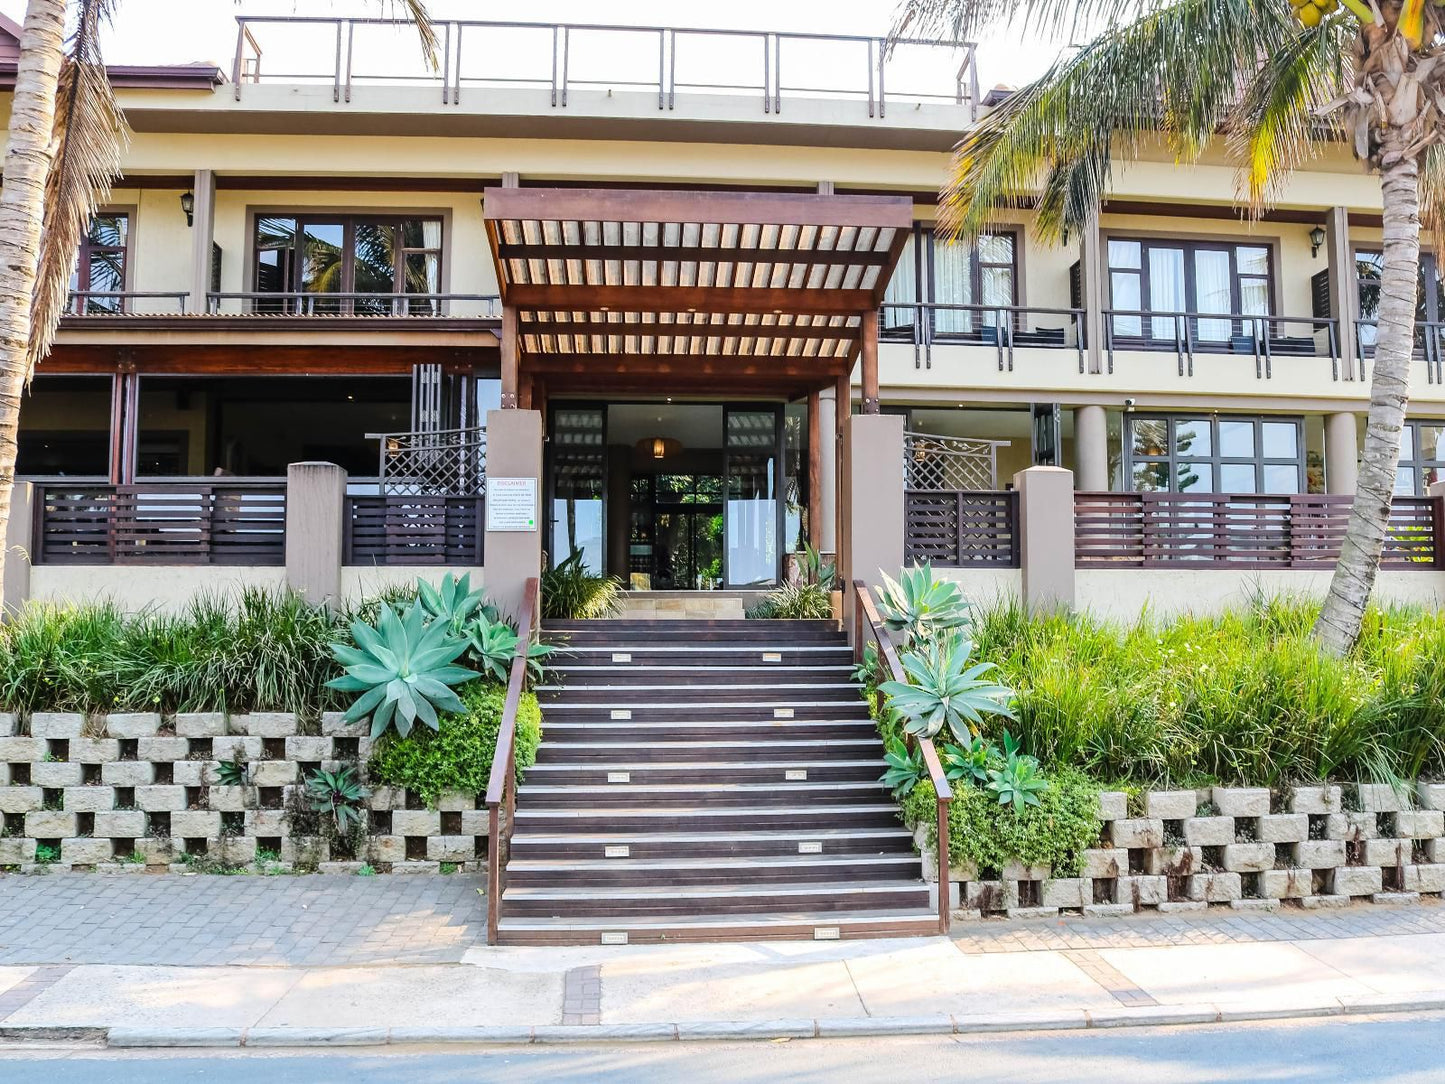 Coco De Mer Boutique Hotel Ballito Kwazulu Natal South Africa House, Building, Architecture, Palm Tree, Plant, Nature, Wood